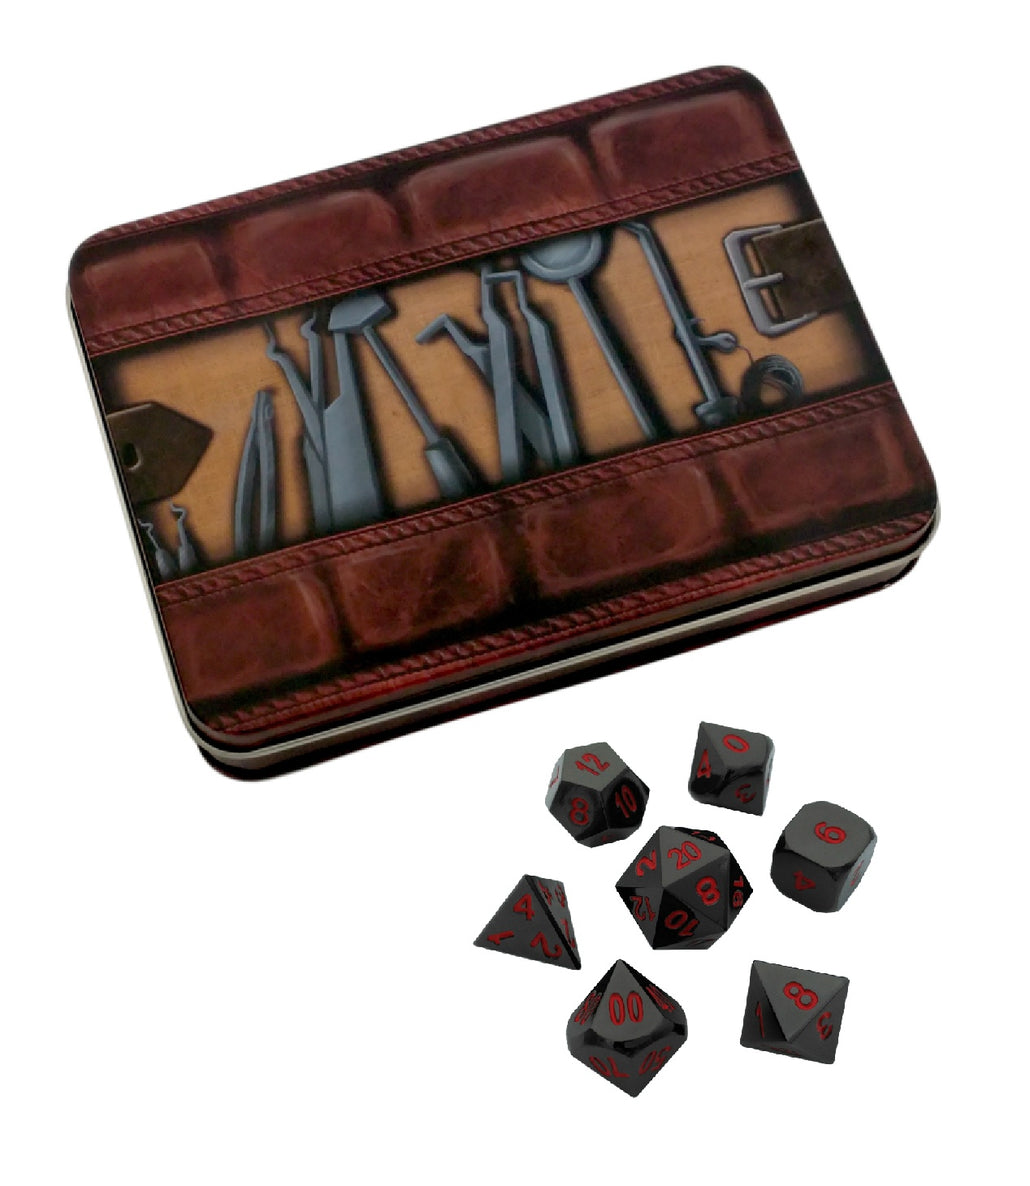 Thieves' Tools with Smoke and Fire | Shiny Black Nickel with Red Numbers Metal Dice